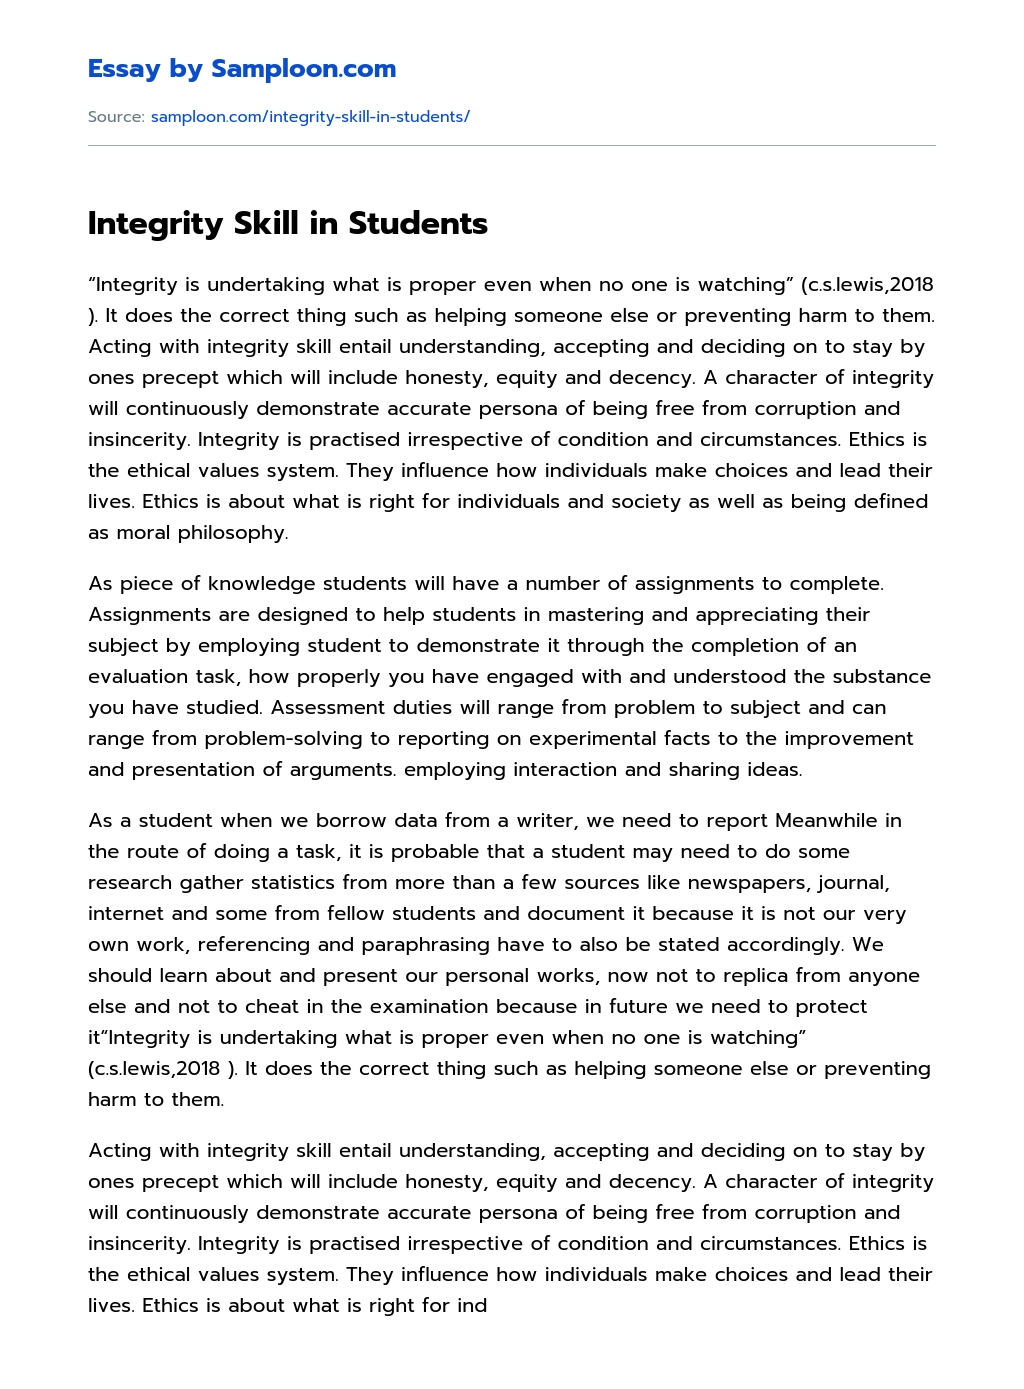 Integrity Skill in Students essay